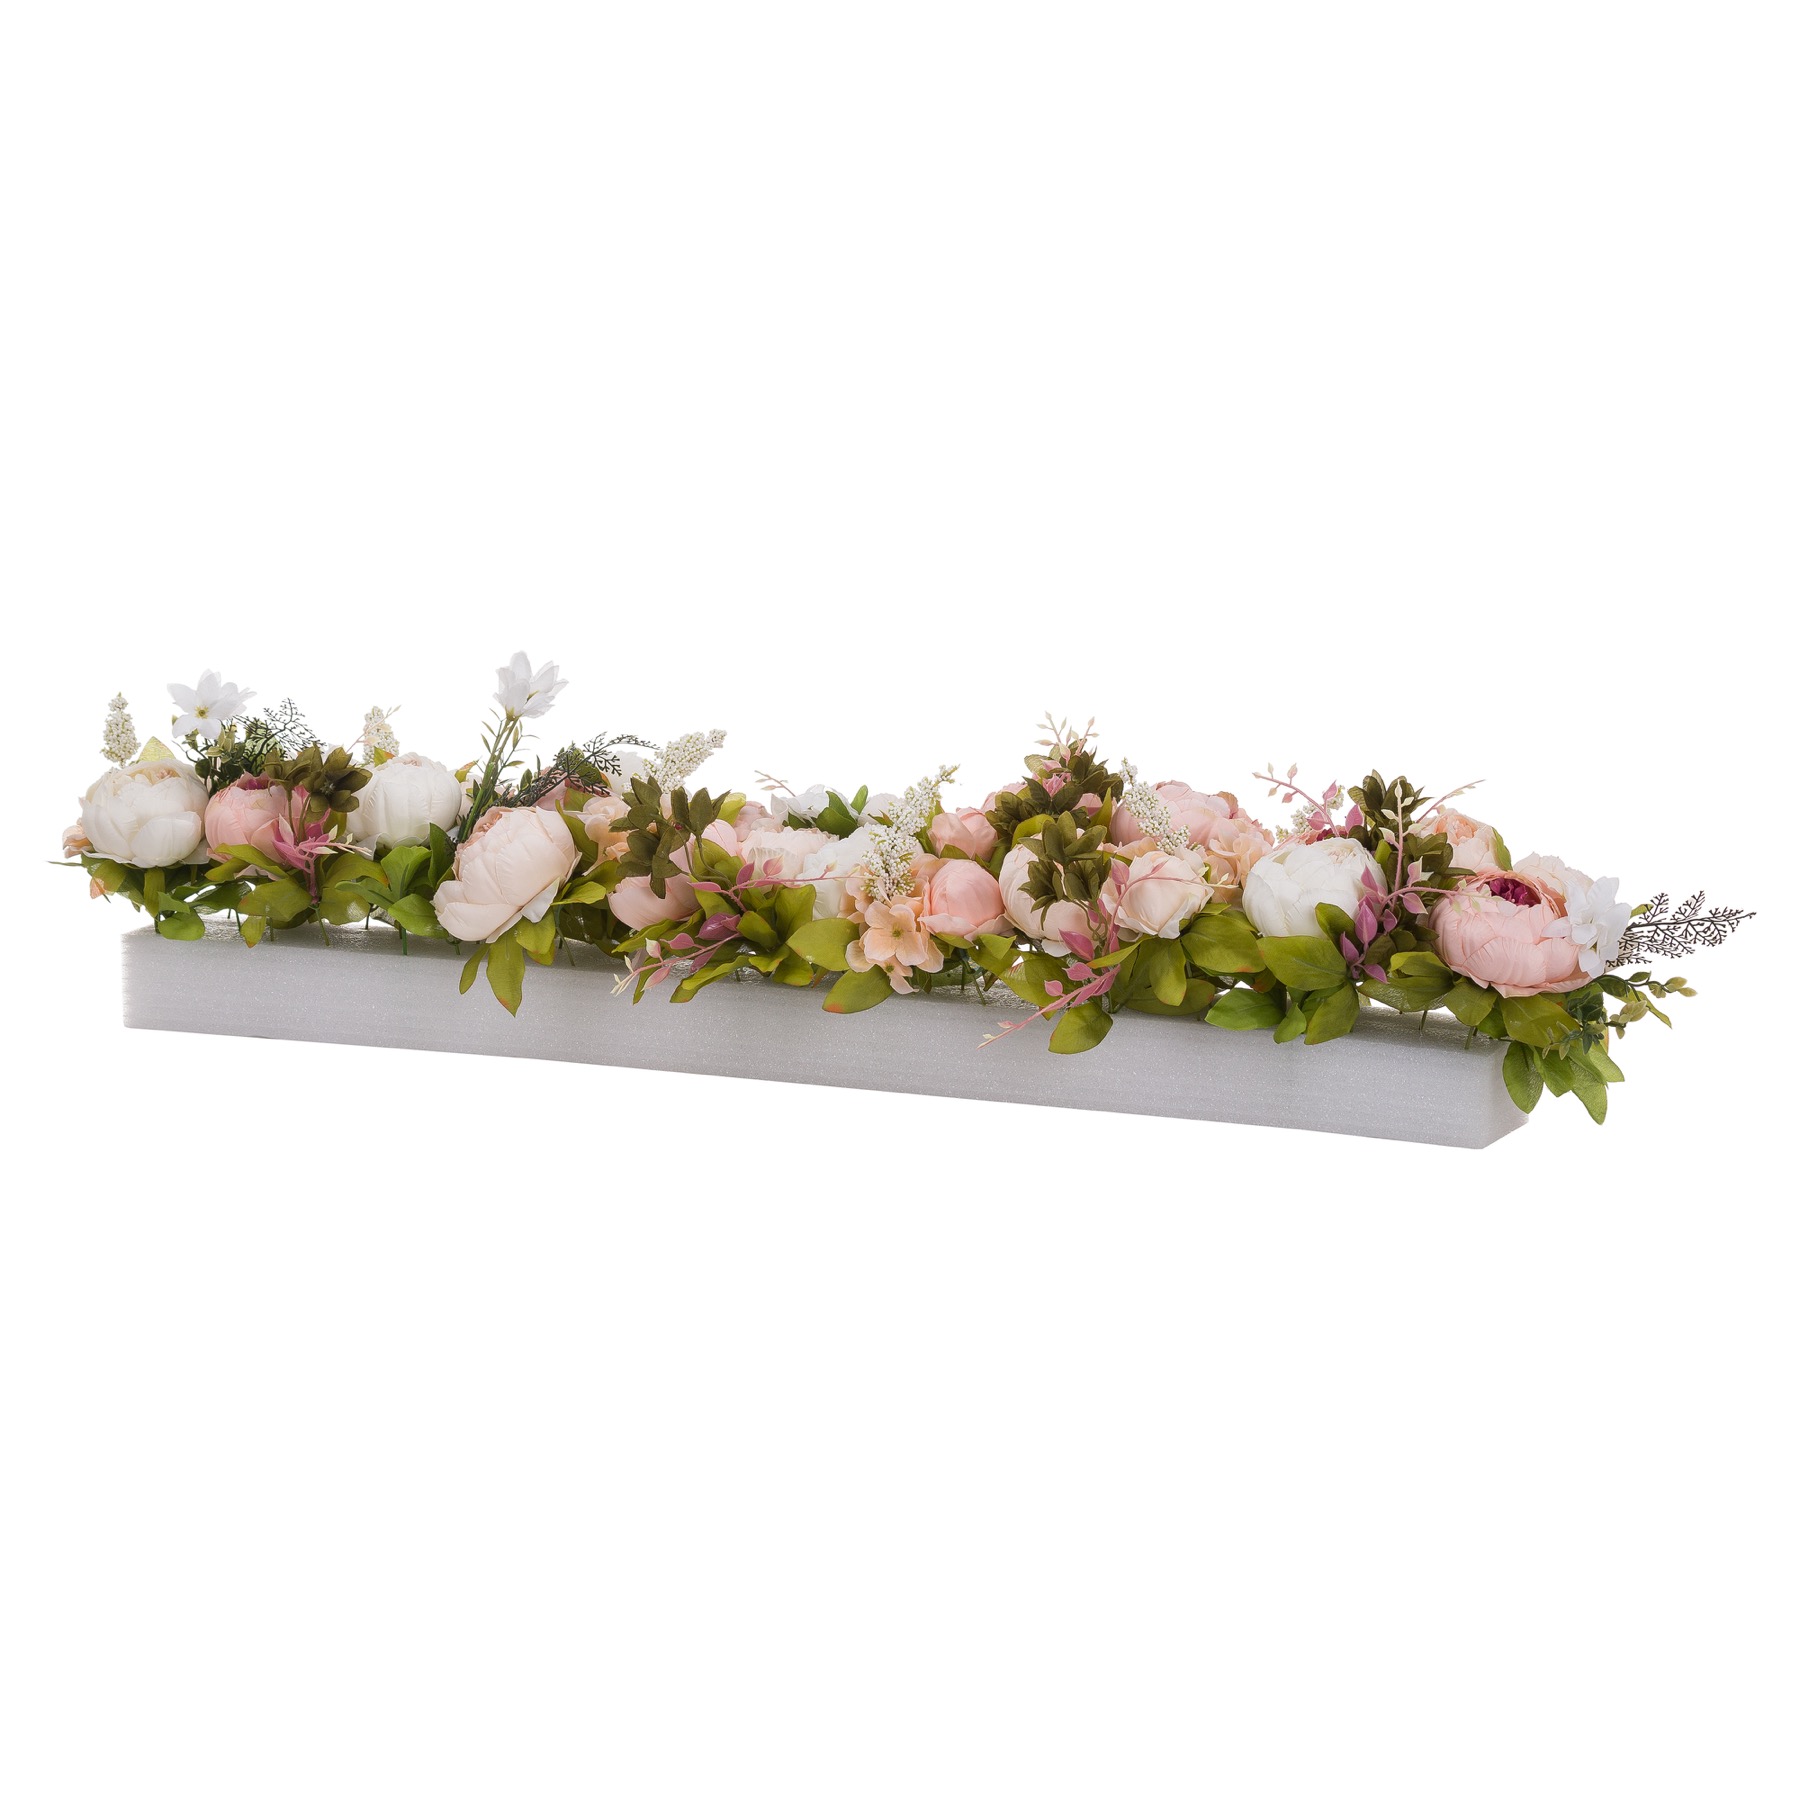 Peony Table Runner - Image 1